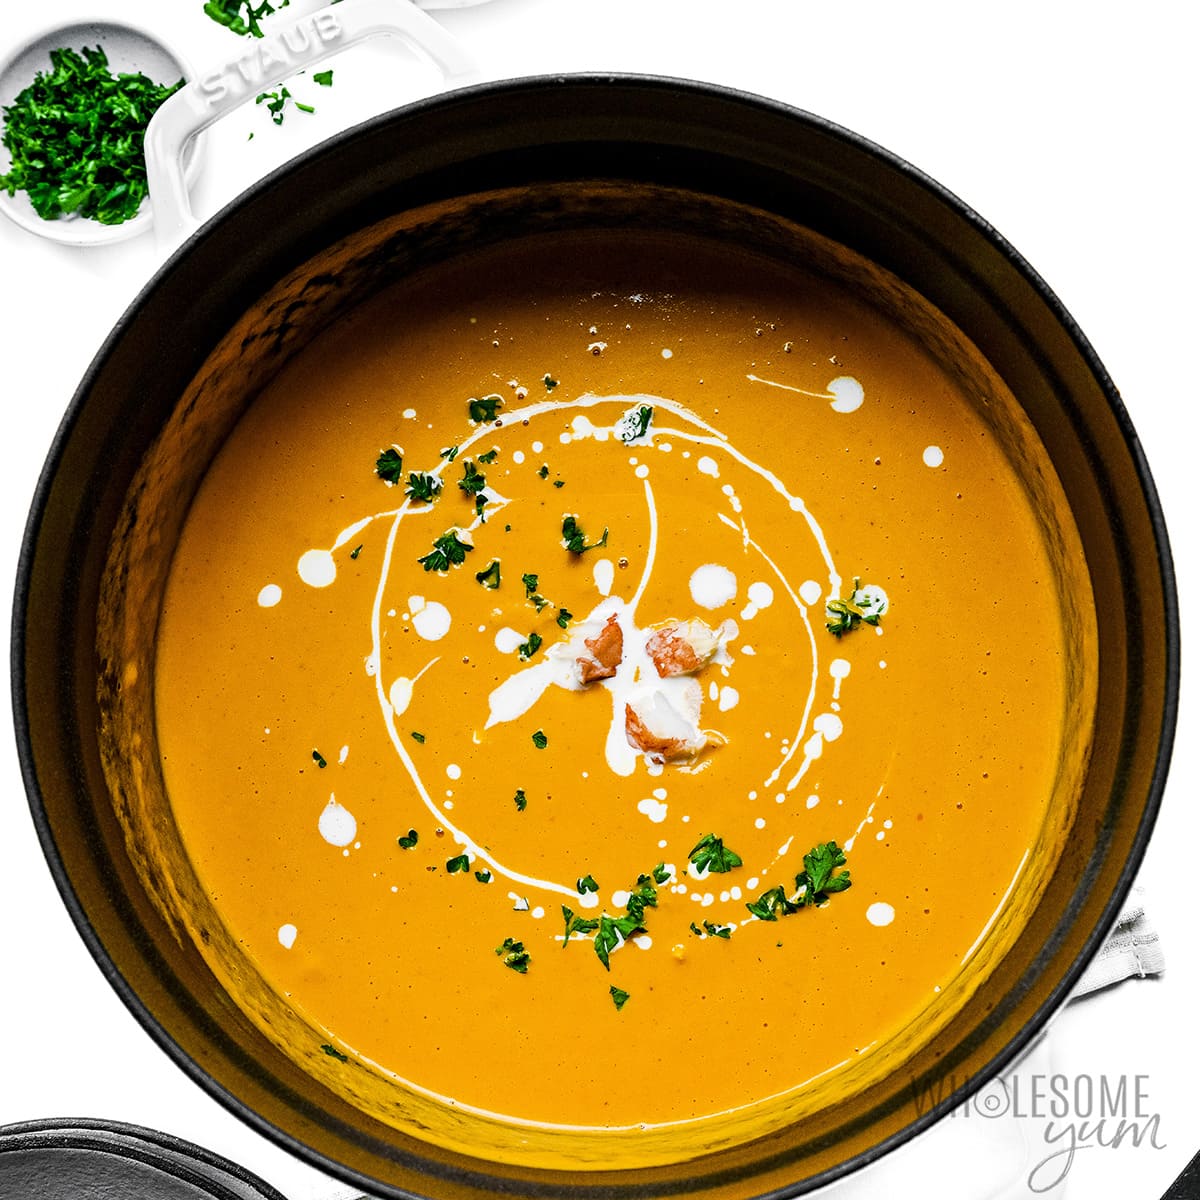 Lobster Bisque Recipe (Easy & Creamy!) - Wholesome Yum